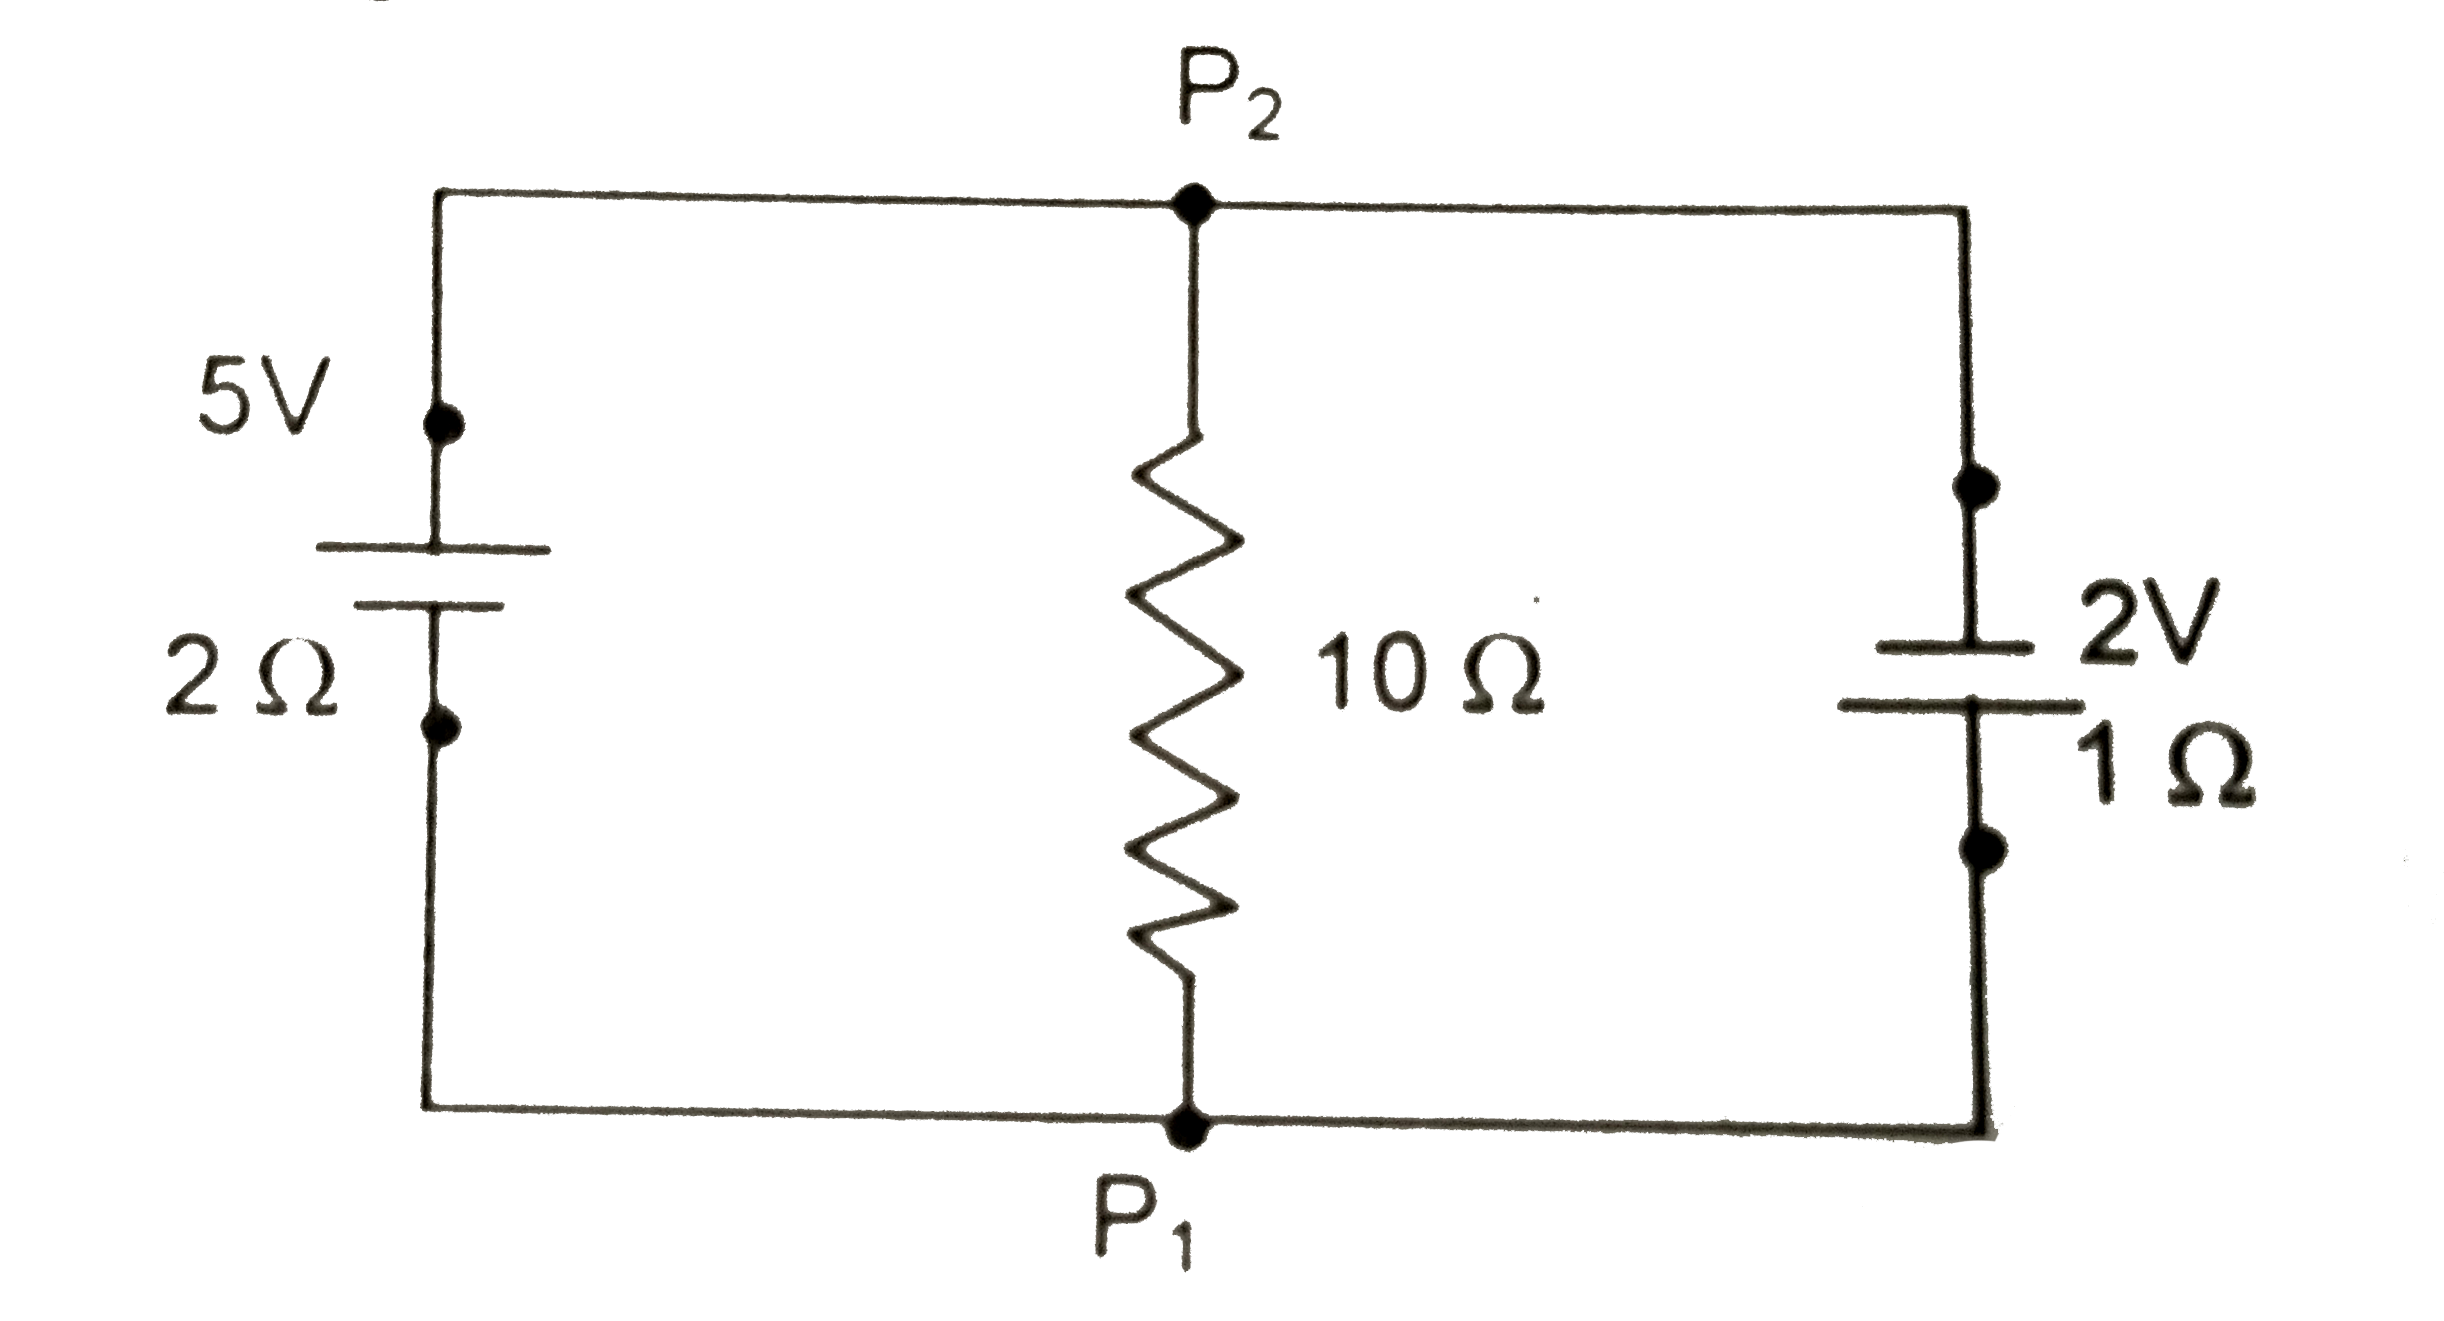 A 5V battery with internal resistance 2 Omega and a 2V battery with internal resistance 1 Omega are connected to a 10 Omega resistor as shown in the figure. The current in the 10 Omega resistor is